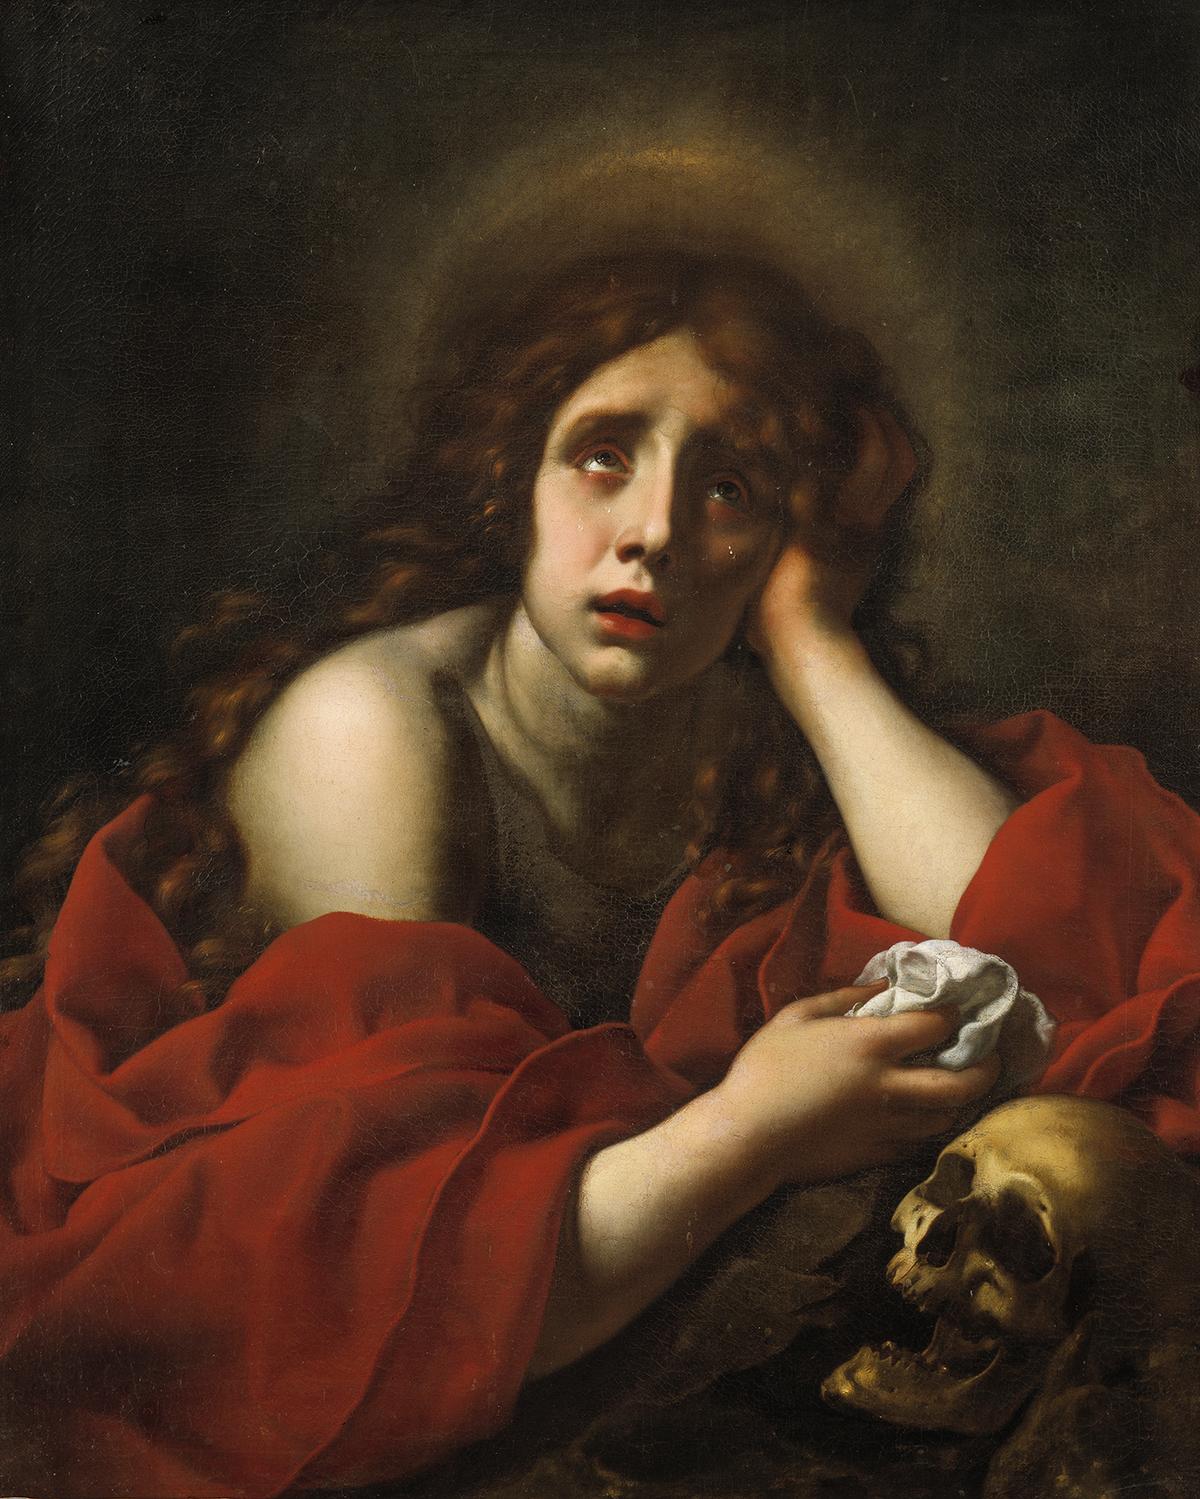 "The Penitent Mary Magdalene" by Carlo Dolci. Oil on canvas. National Museum of Fine Arts, Stockholm. (Public Domain)